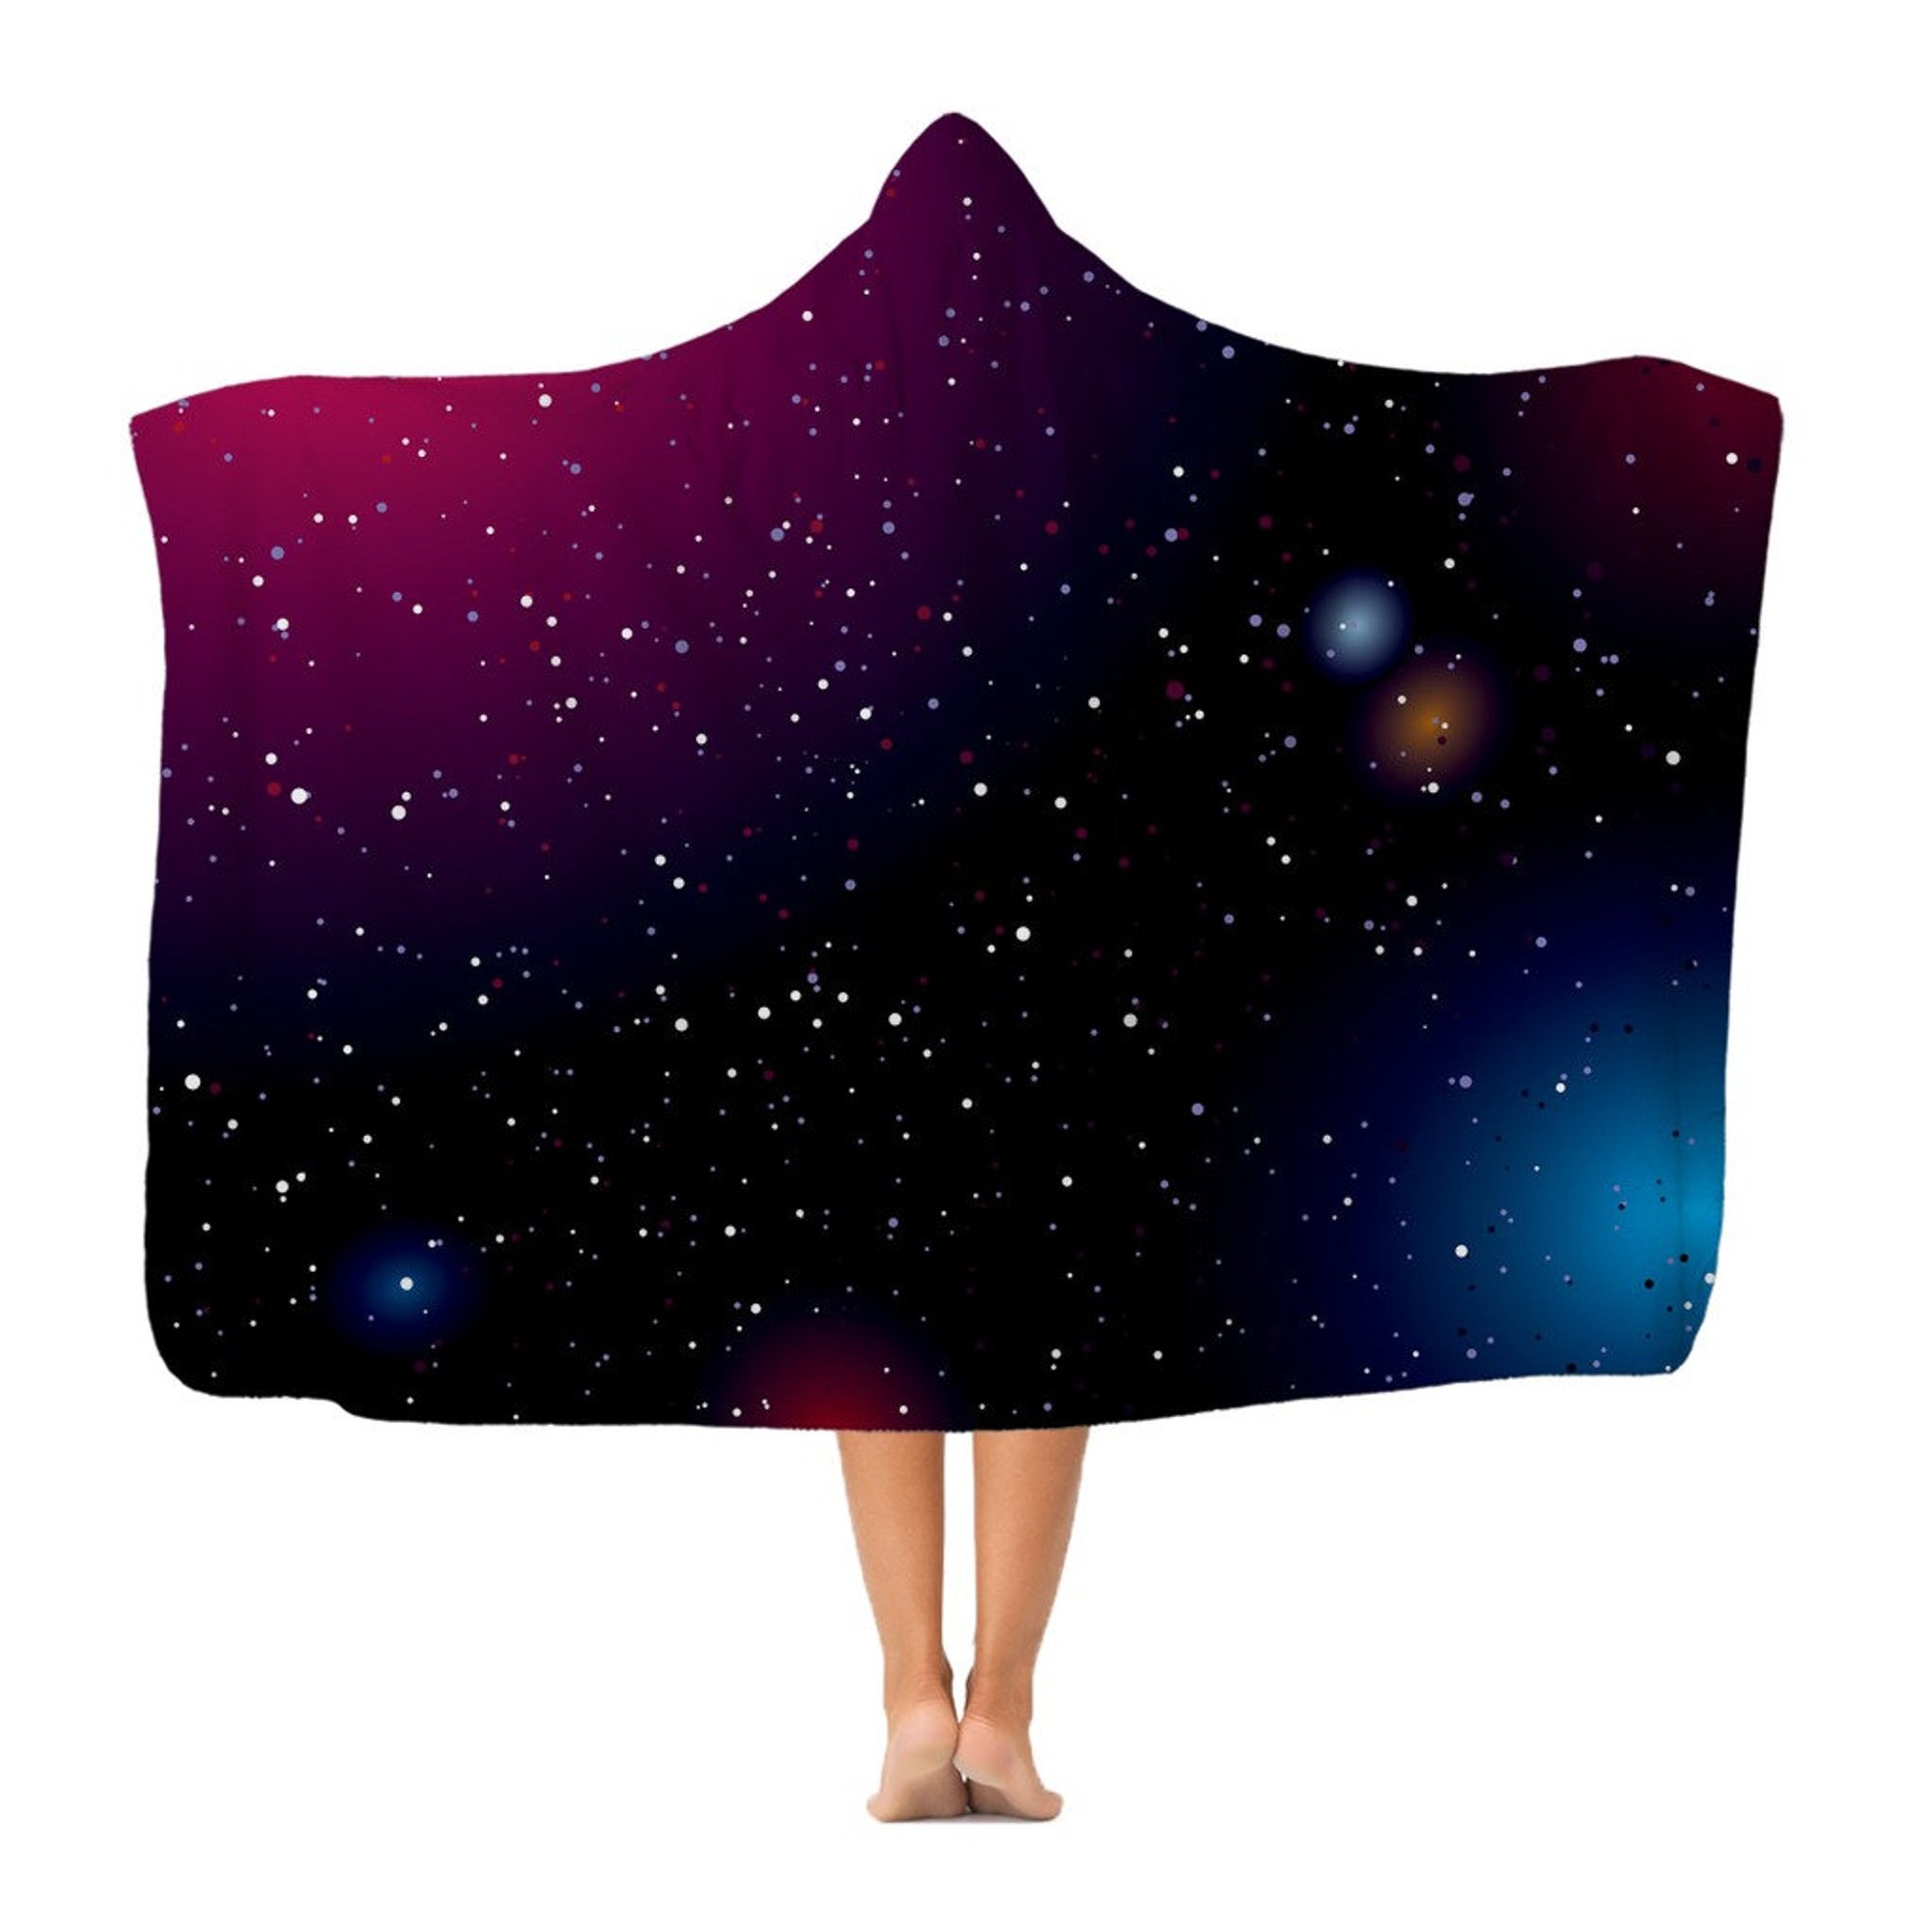 Space Landscape Adult Hooded Blanket, Space Arena Hooded Blanket, Christmas Gift Idea, Birthday Gift, Made to Order in UK, Made in USA